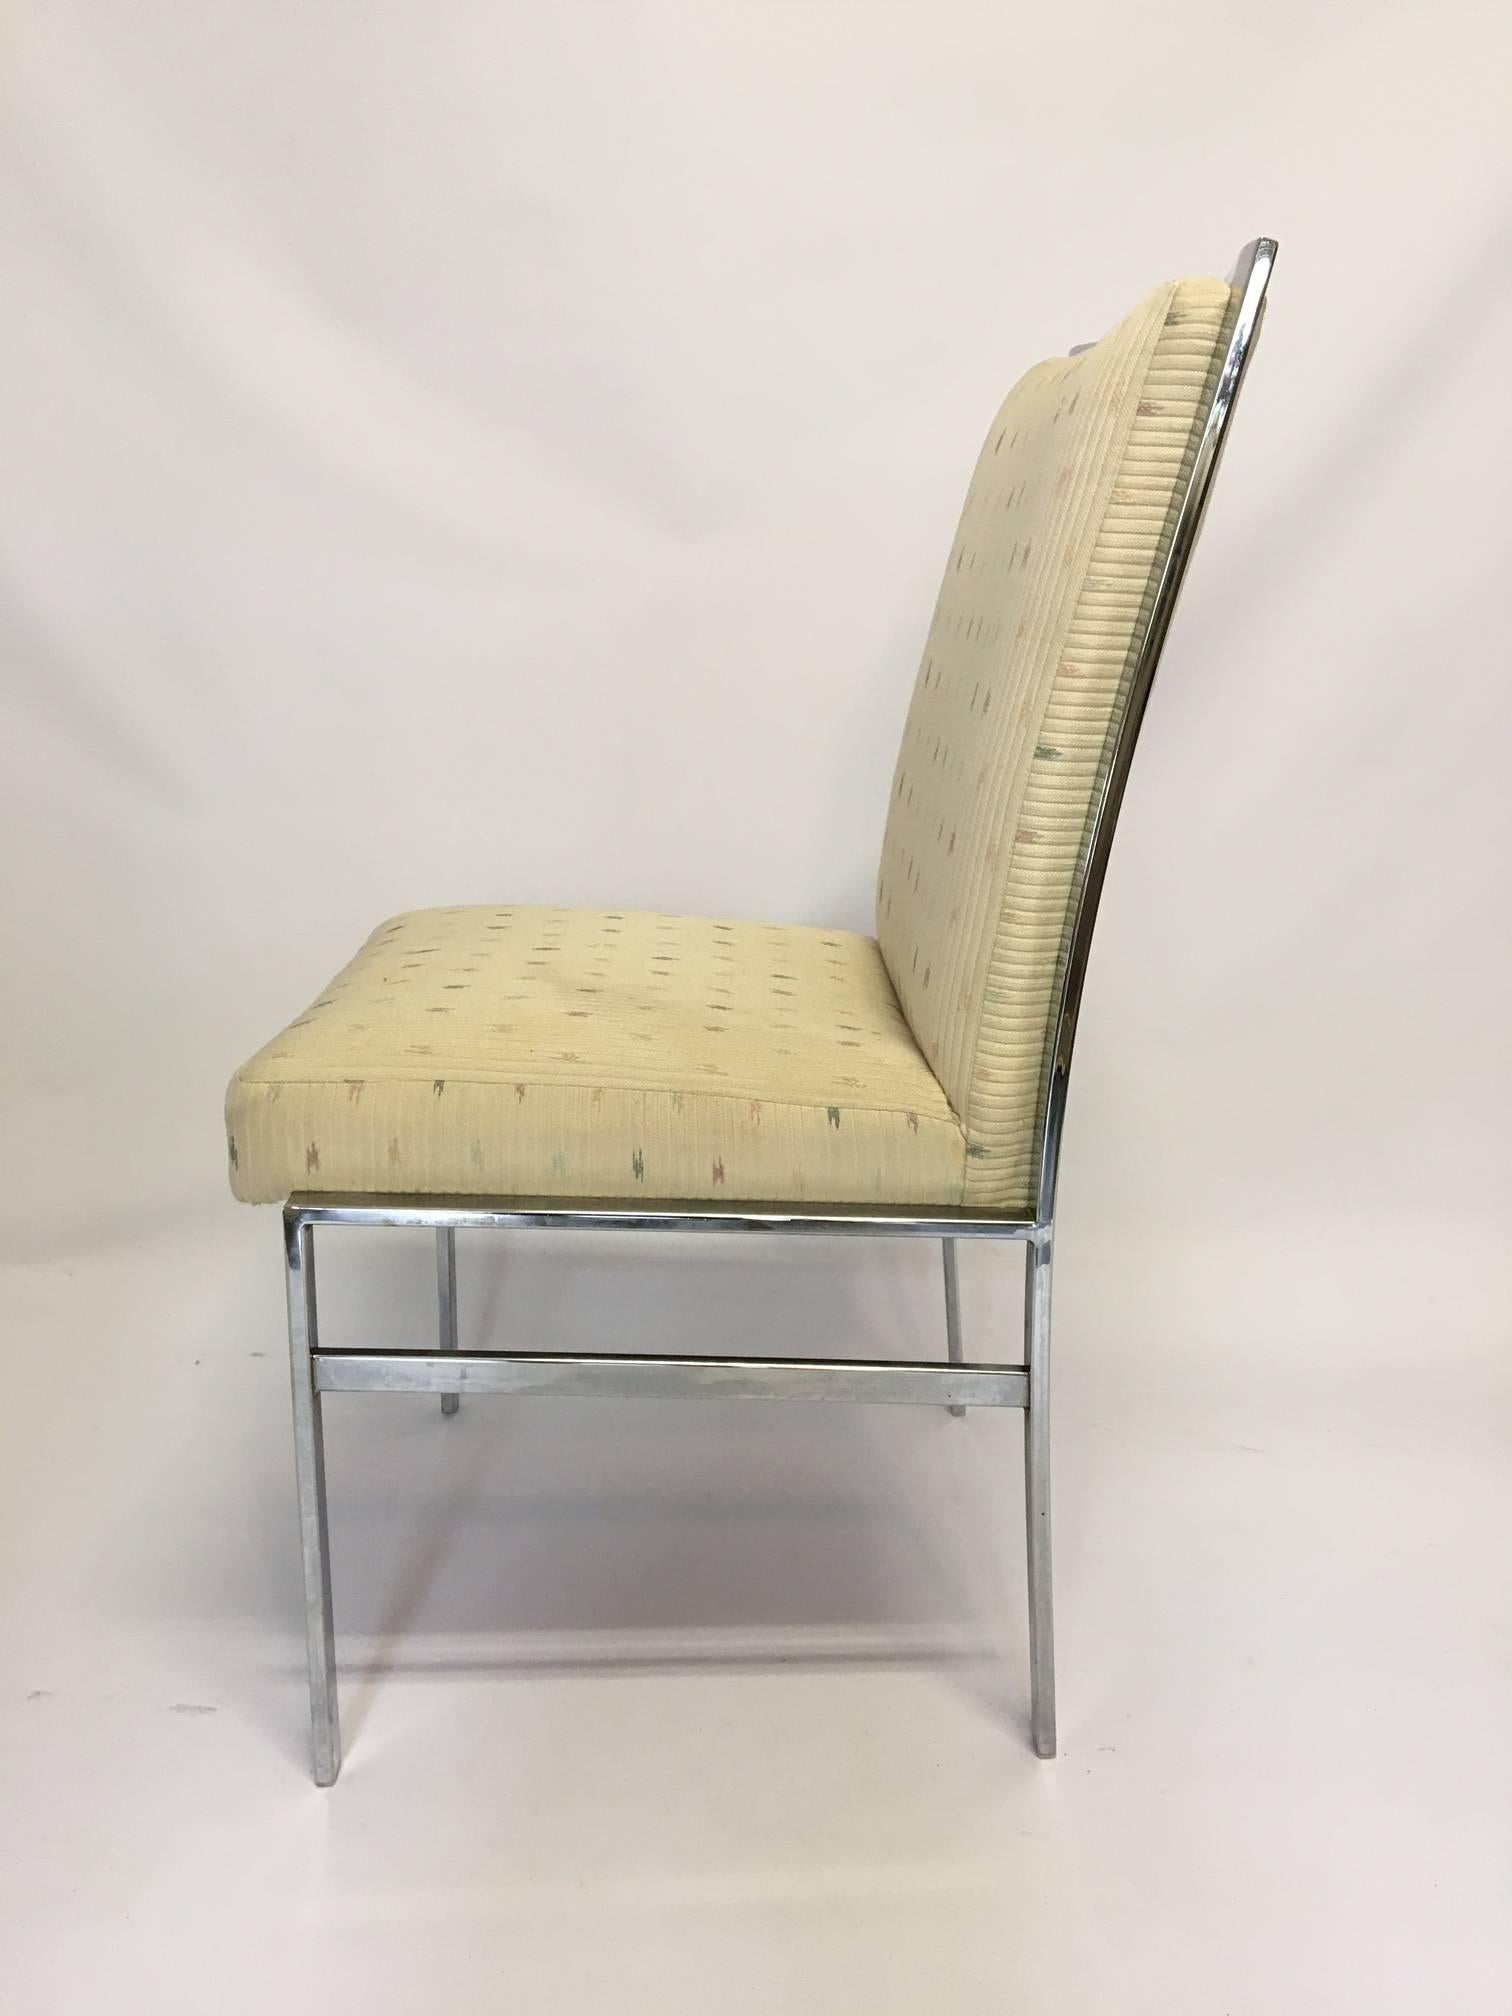 Chrome dining chairs upholstered in a light tan heavyweight fabric. Chrome finish is in excellent vintage condition. Fabric has some areas of discoloration. Measures: Seat height is 19